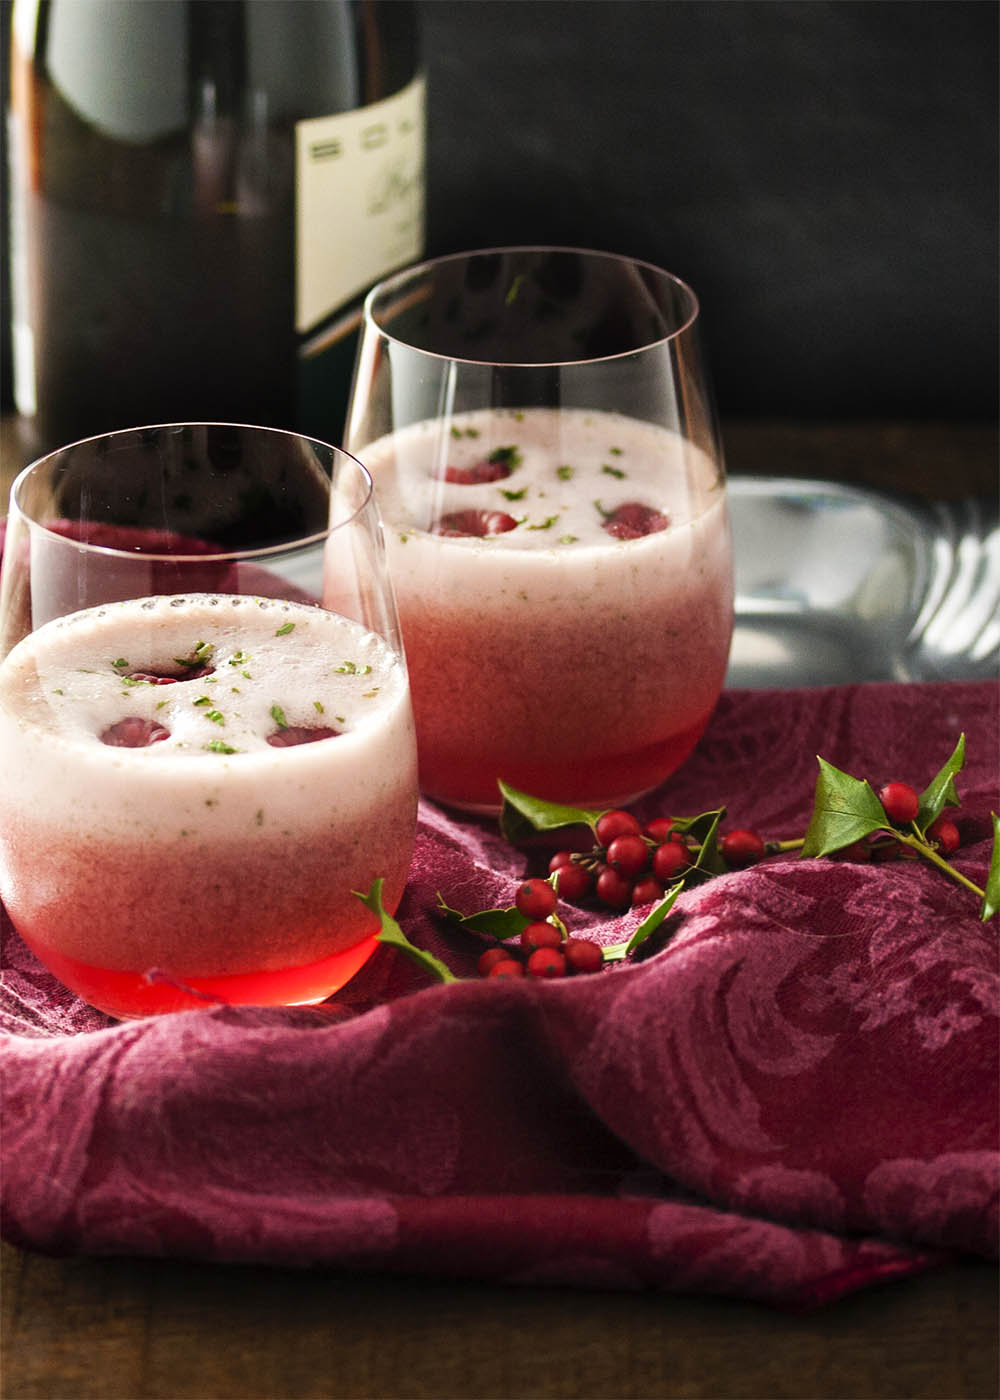 Raspberry Mint Prosecco Cocktail - Holiday entertaining is the time to bring out the bubbly and this prosecco sorbet cocktail is just the thing for a celebration. 5 minutes and 4 ingredients is all you need. | justalittlebitofbacon.com